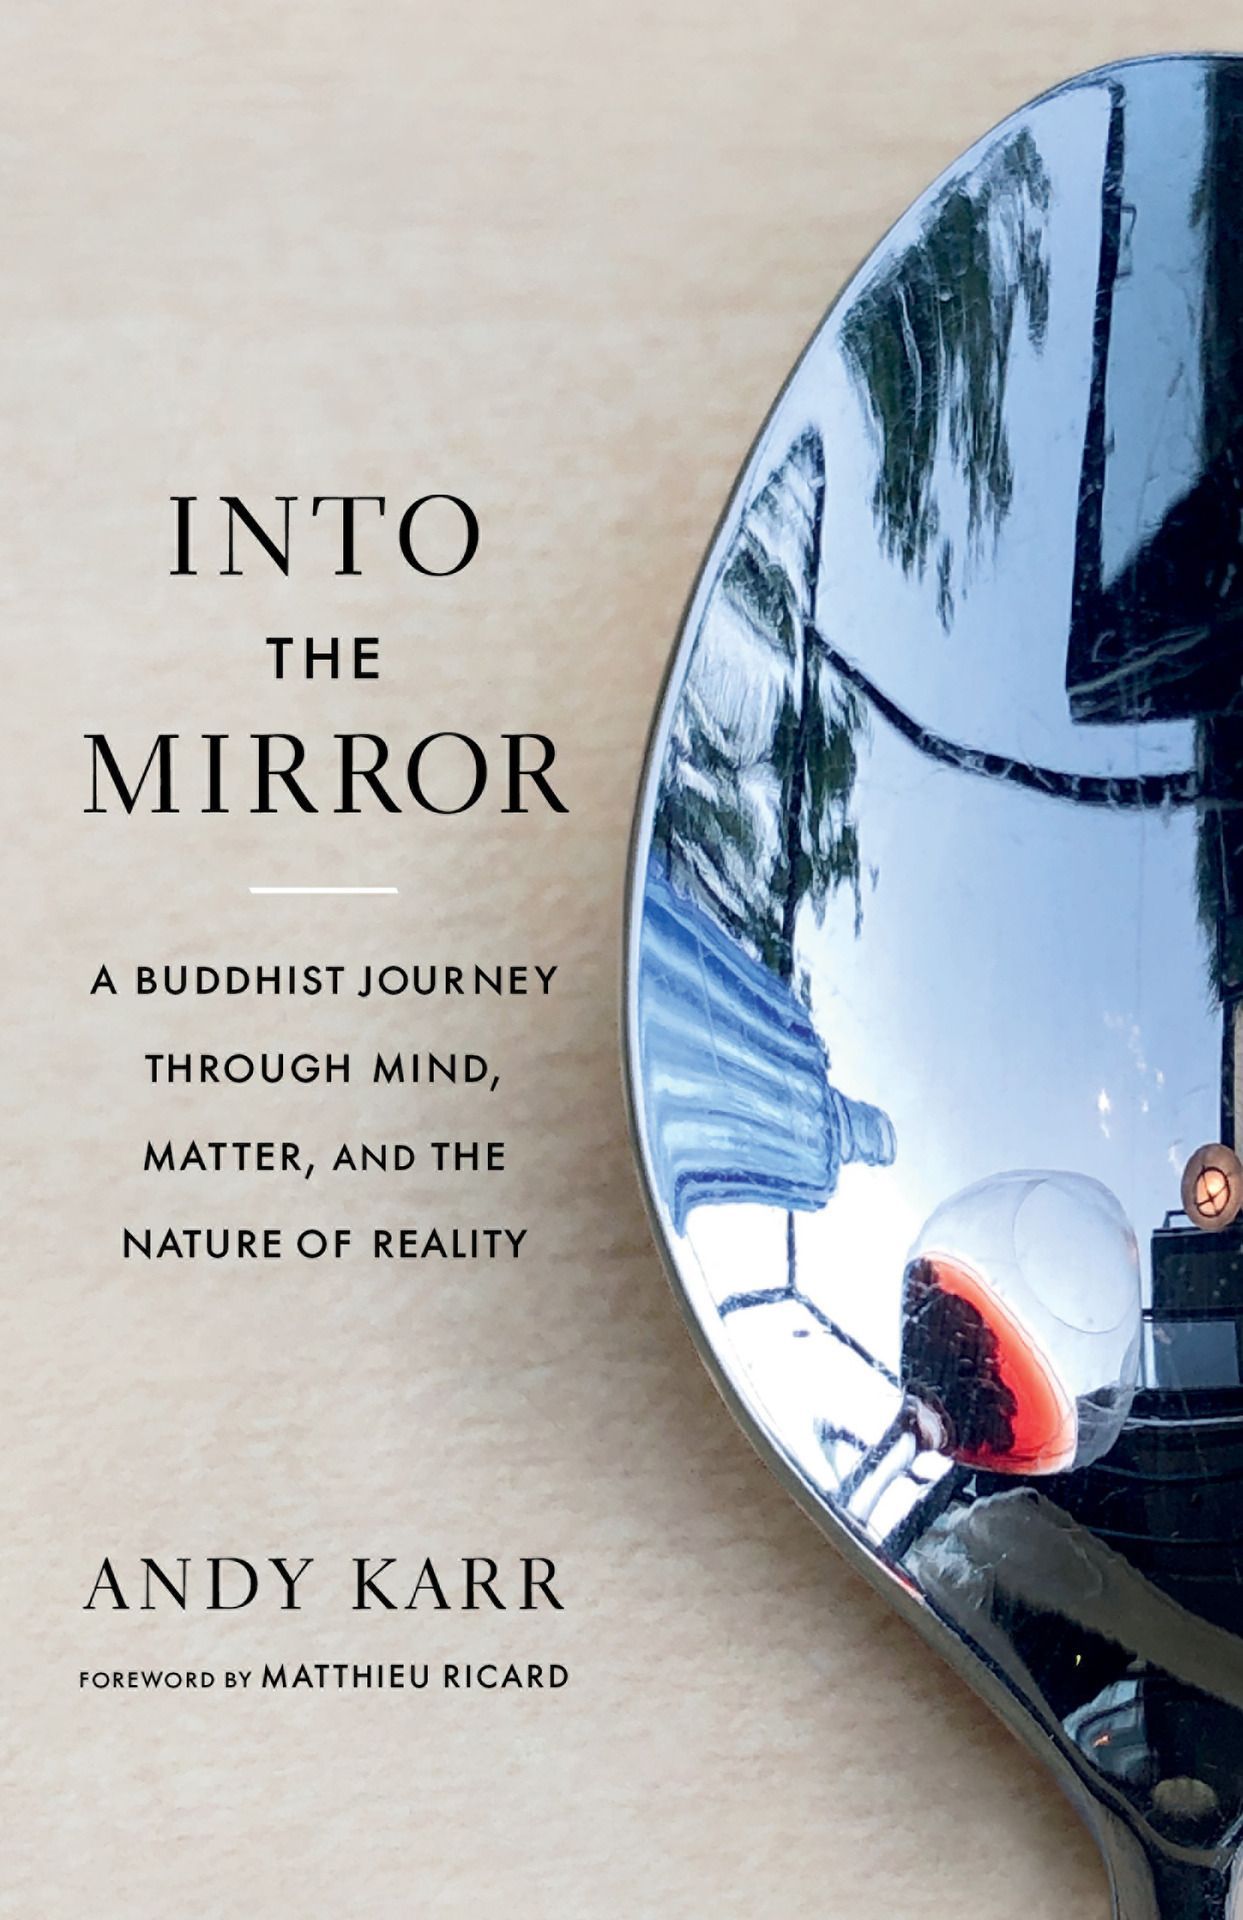 Transcending the Materialistic Illusion: On Andy Karr’s “Into the Mirror”